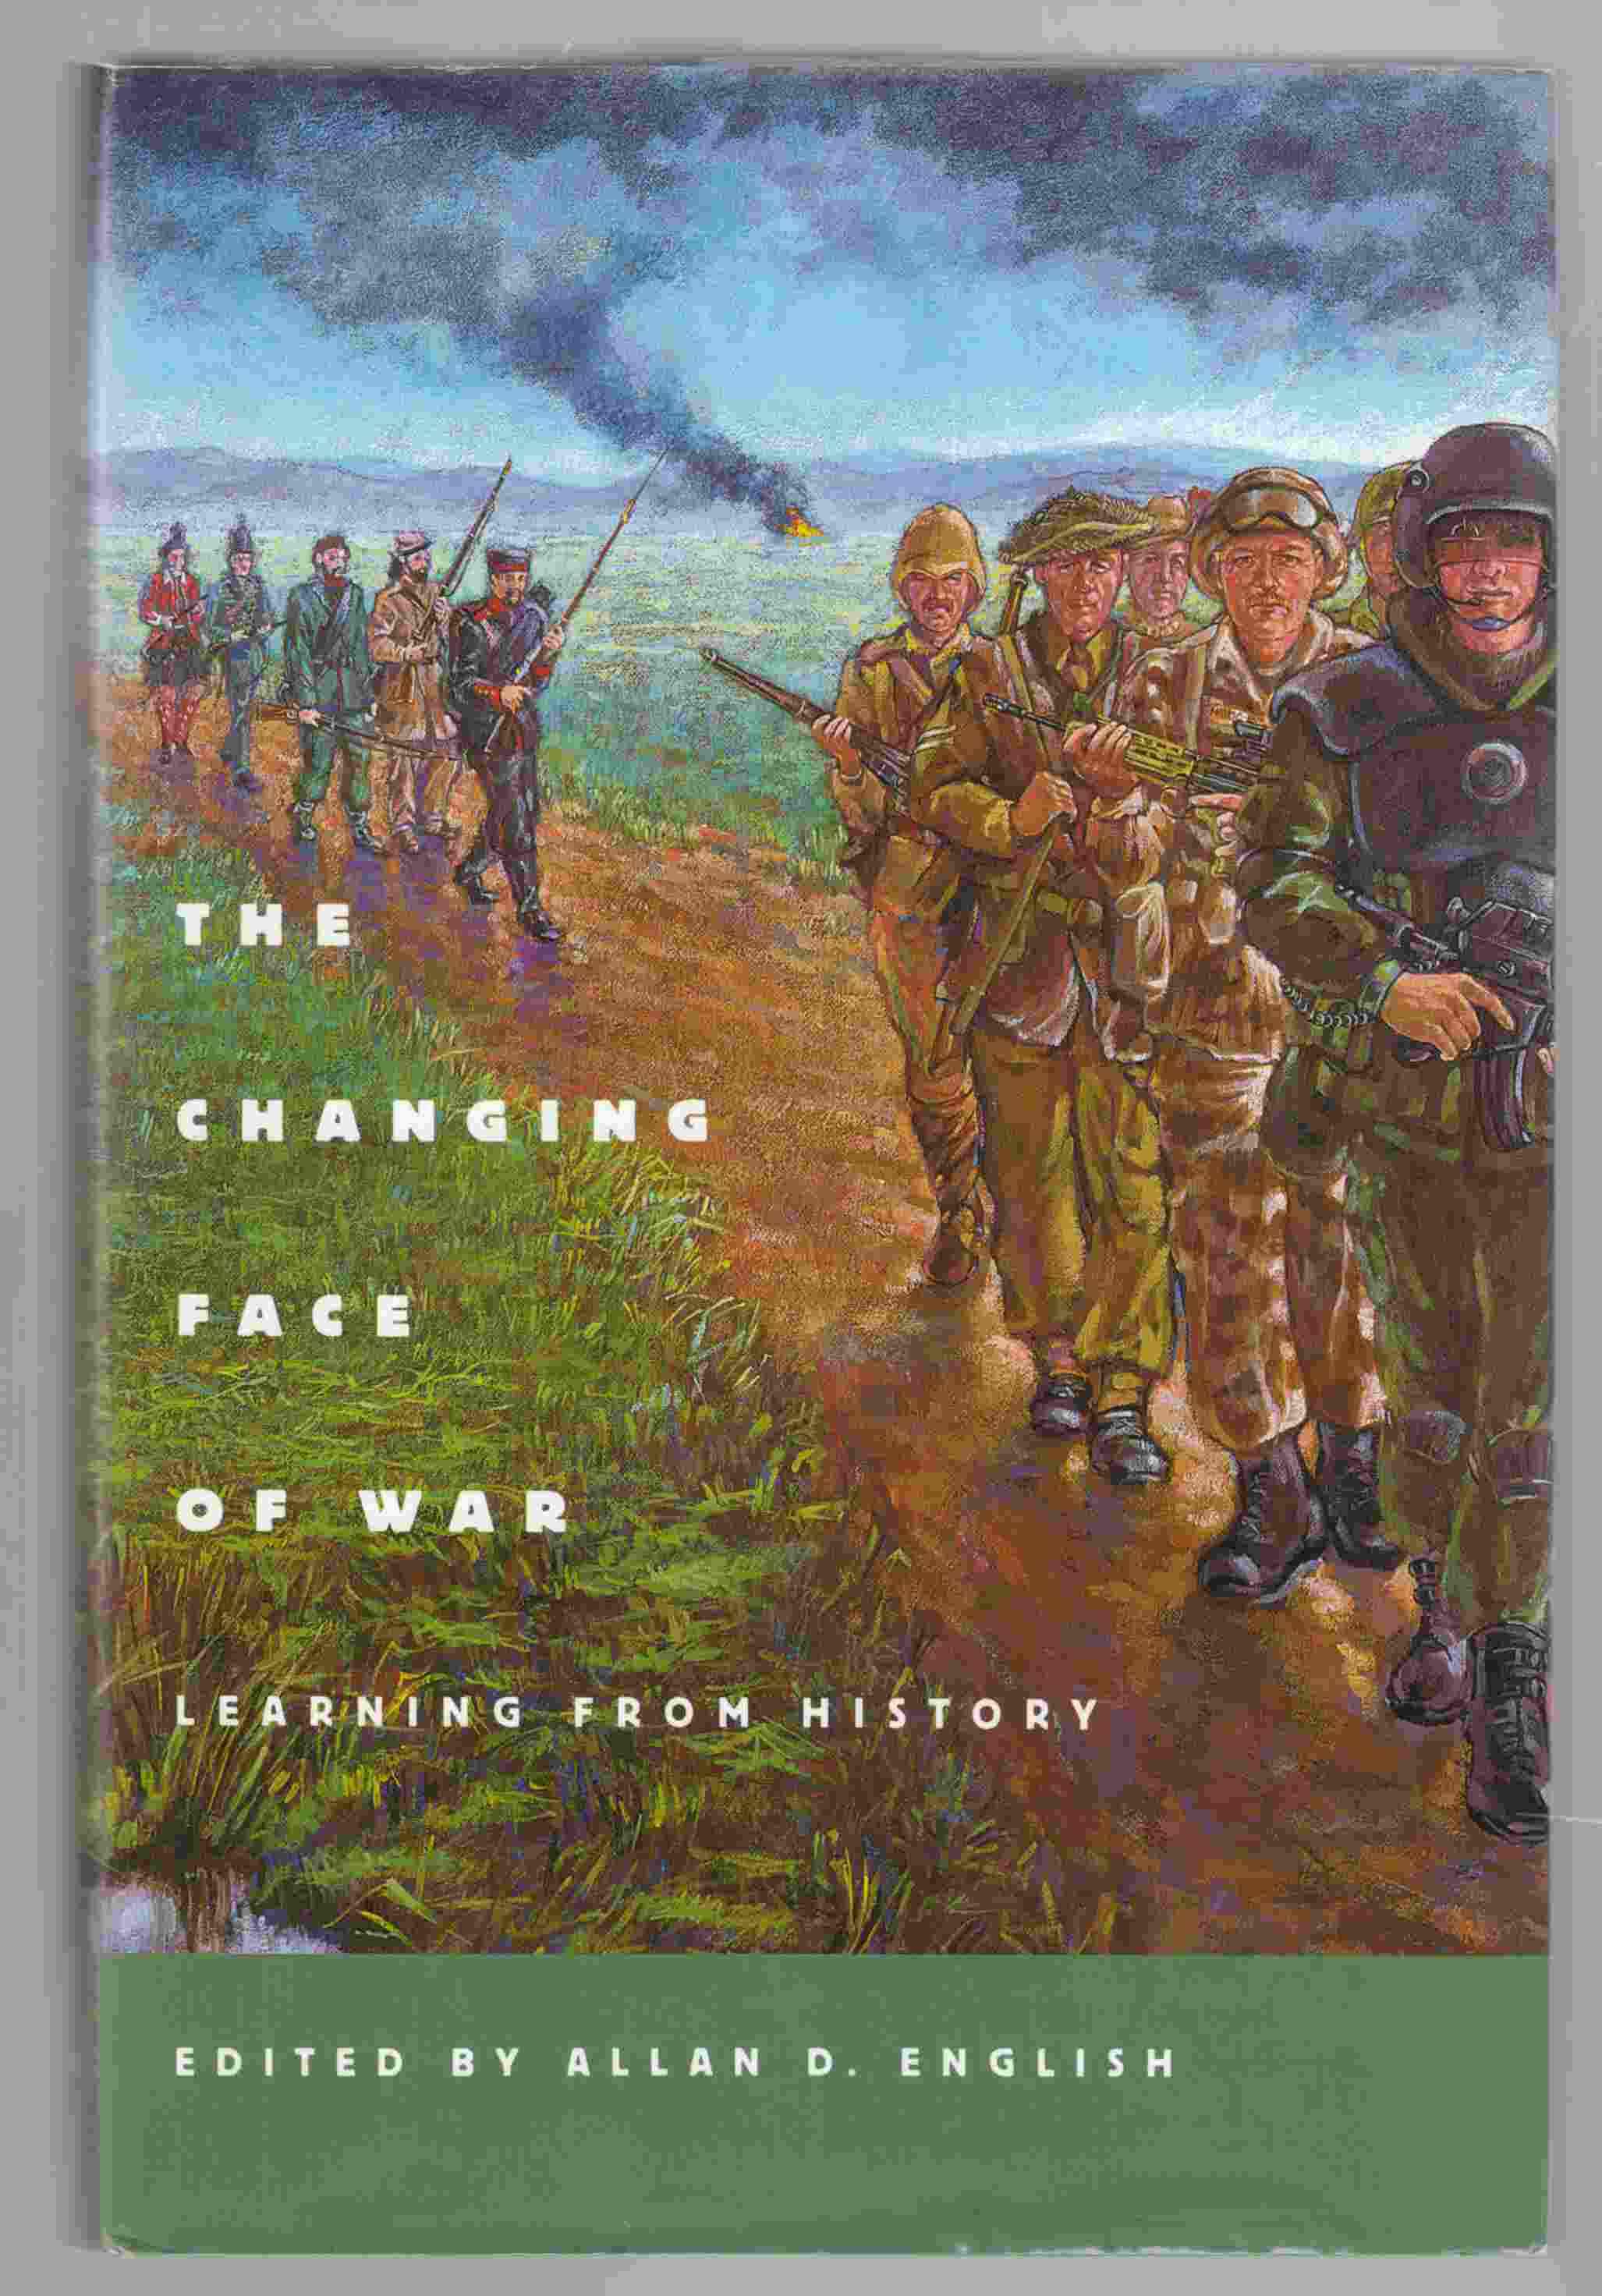 The Changing Face of War Learning from History - English, Allan D. (Ed. )